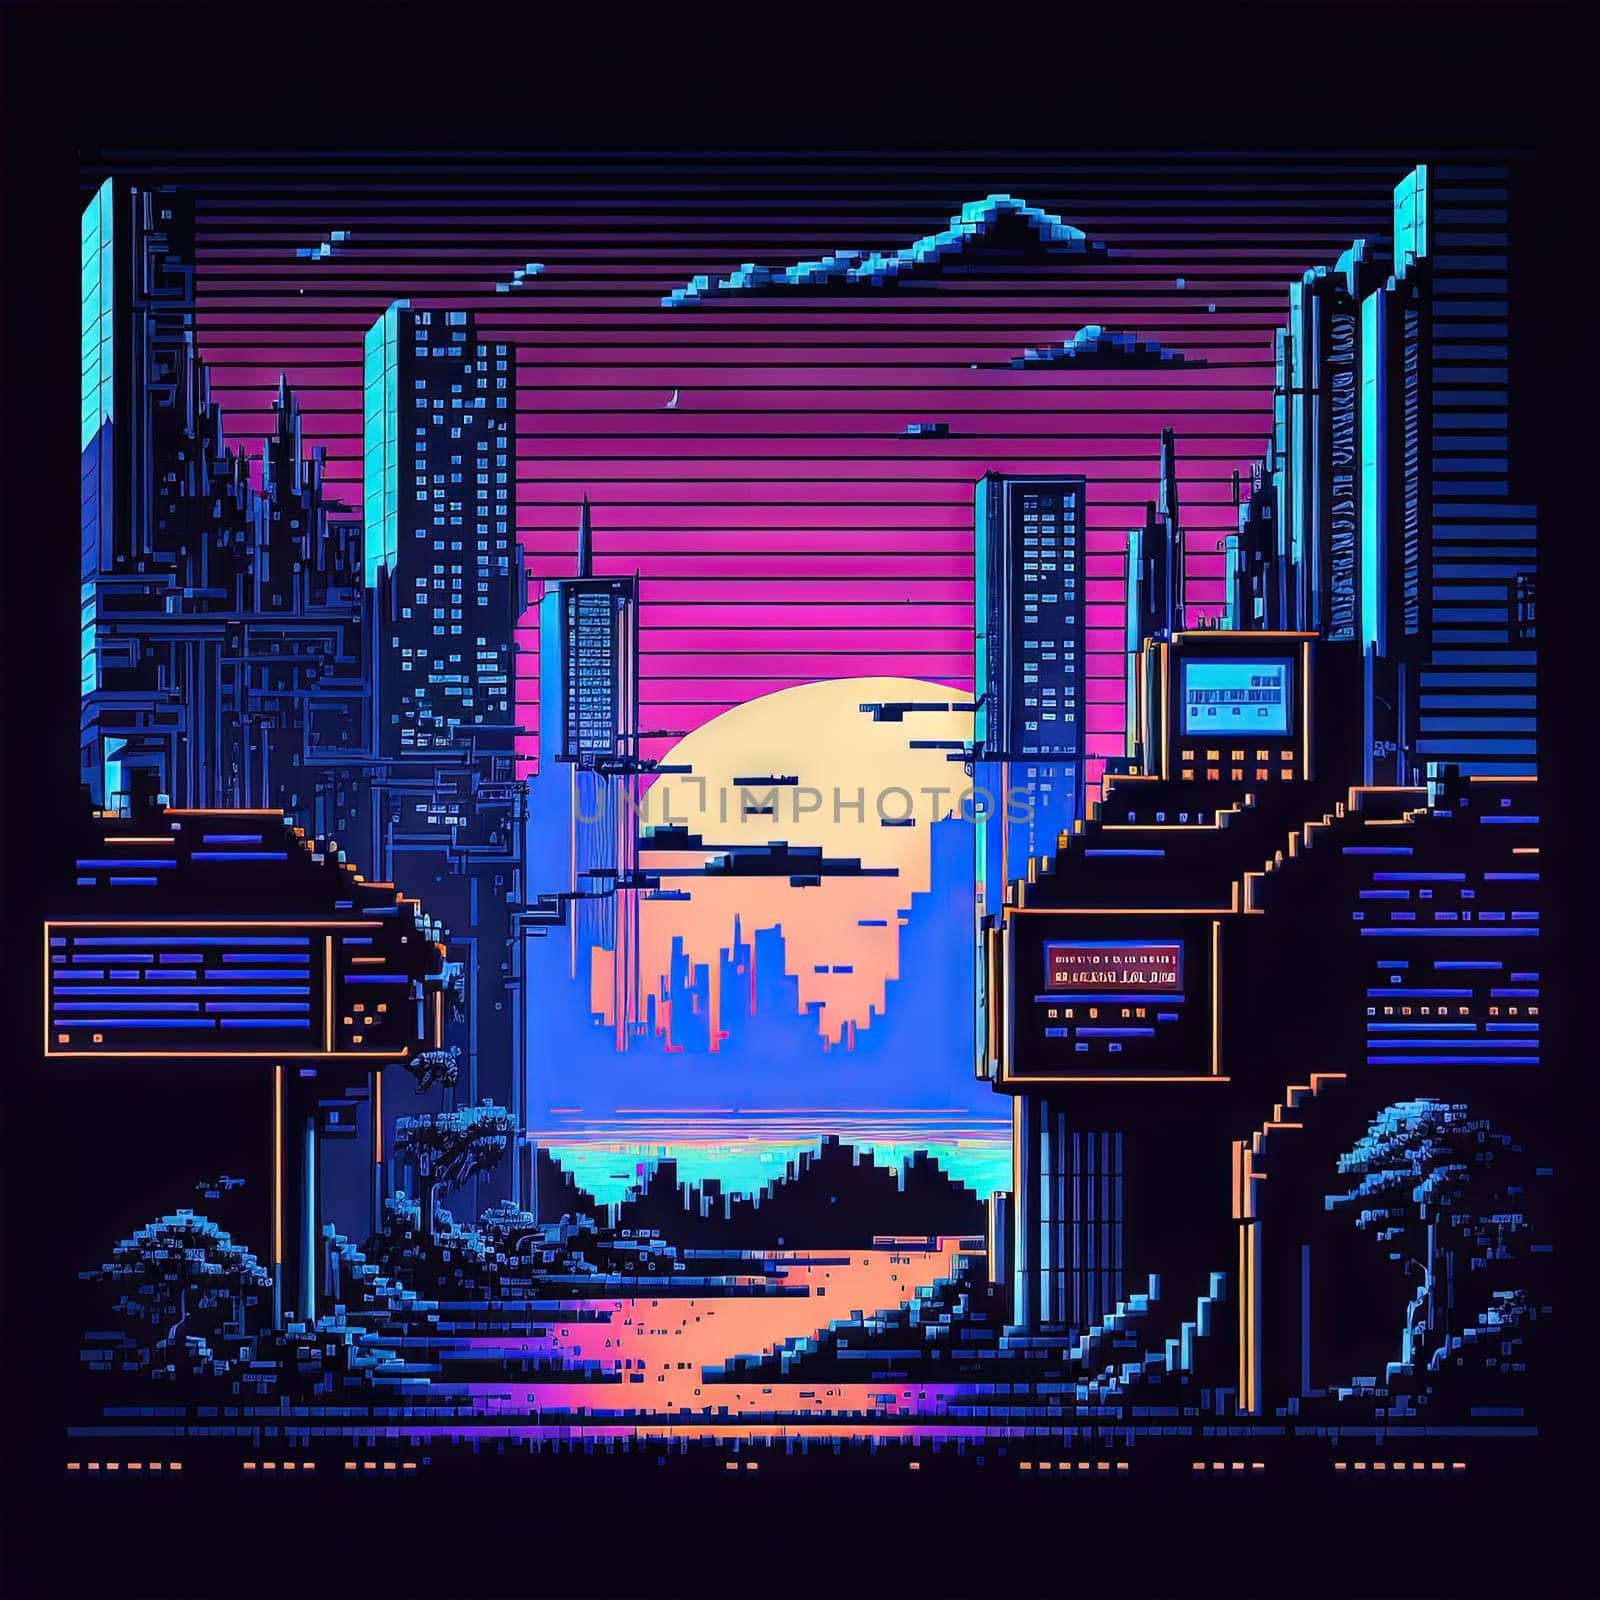 Retro game landscape in 80s style with industrial city district, neon lights and synthwave pixel graphics. Generated AI